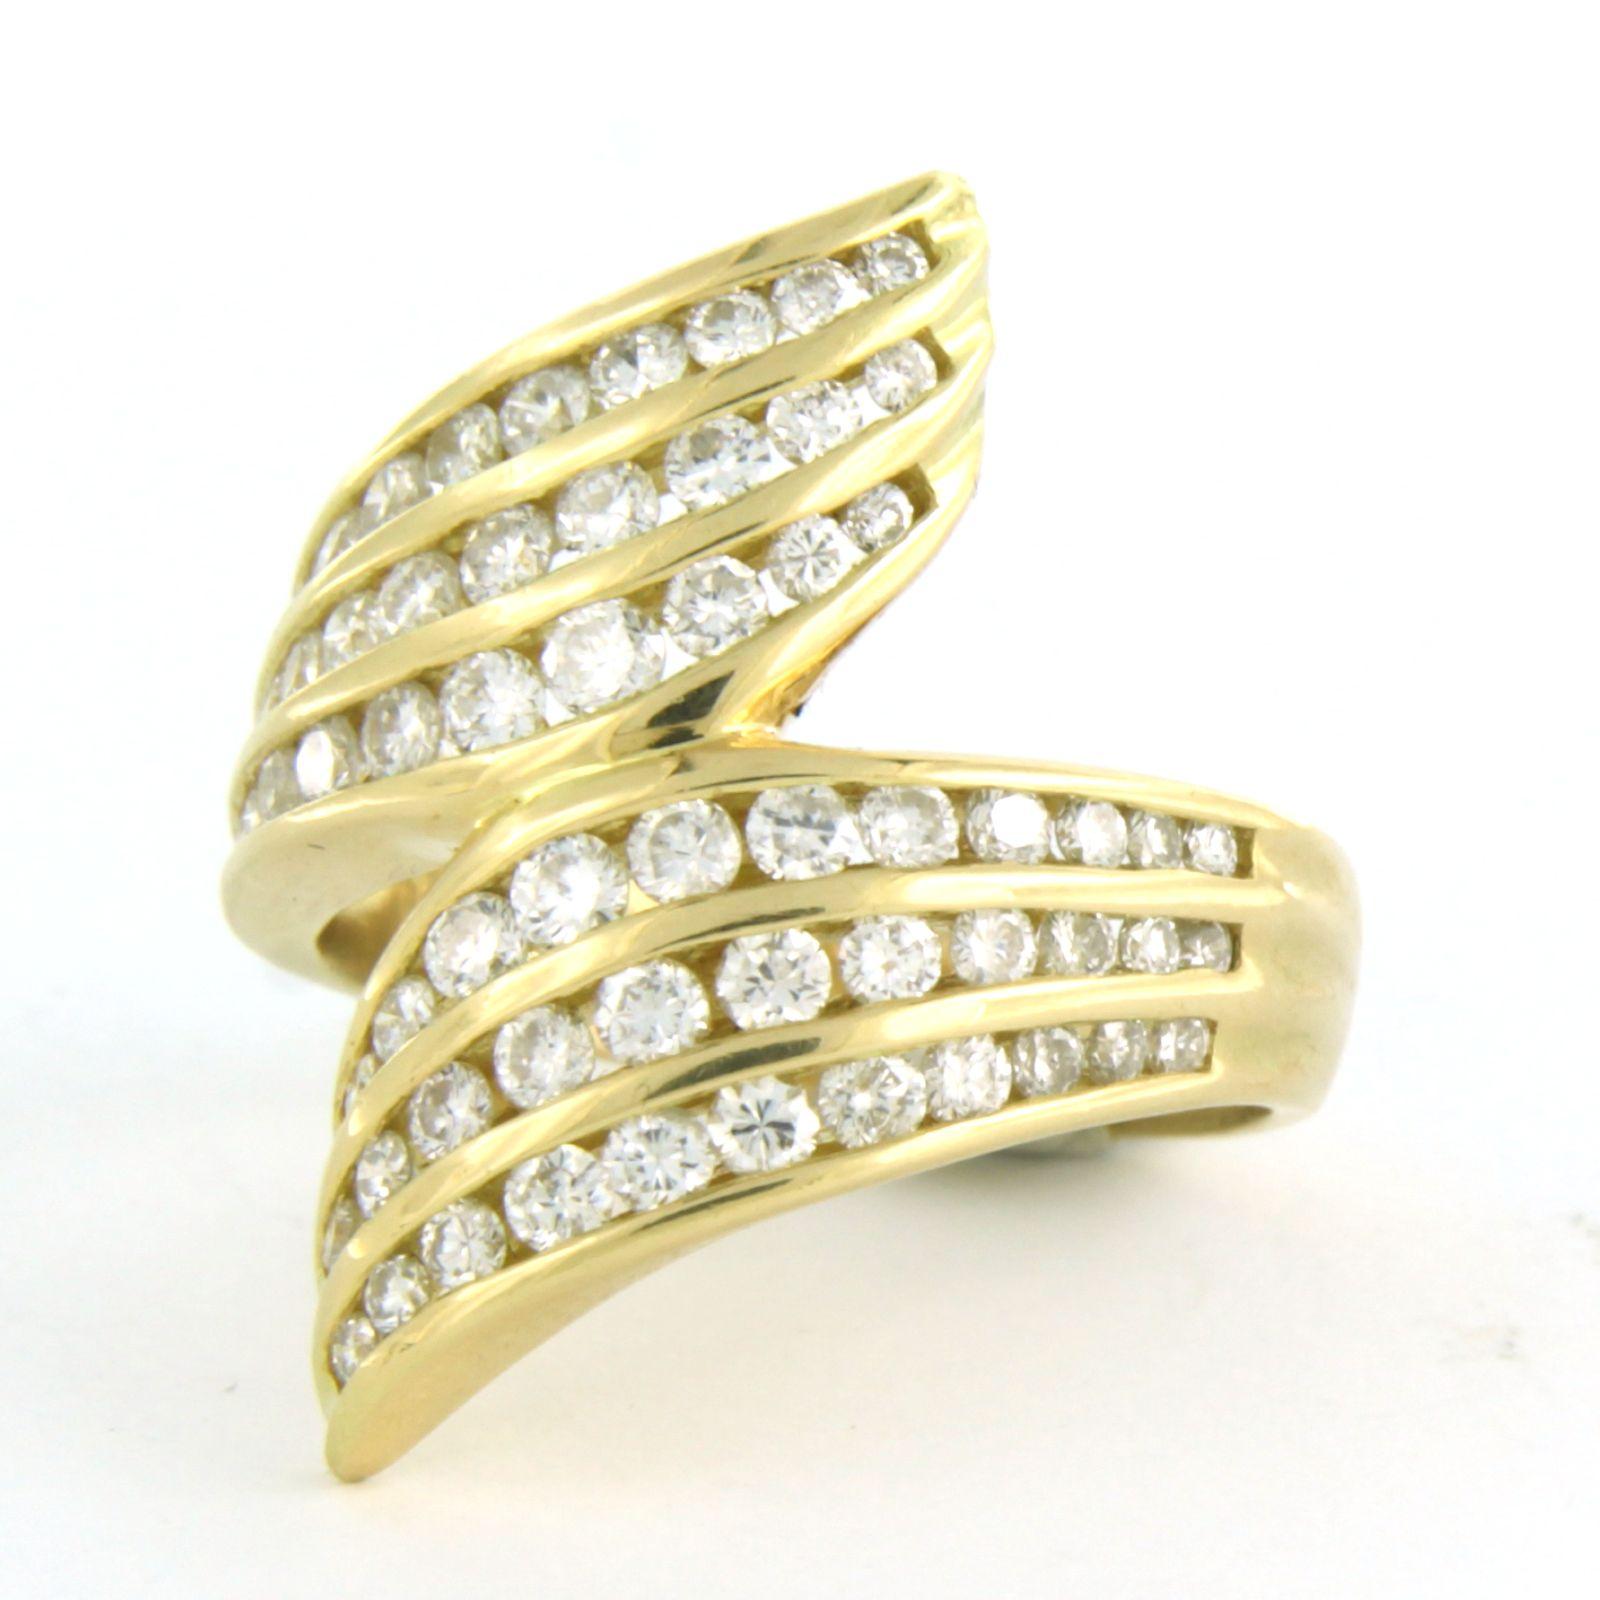 Brilliant Cut Ring Diamond in total 1.48ct 18k yellow gold For Sale